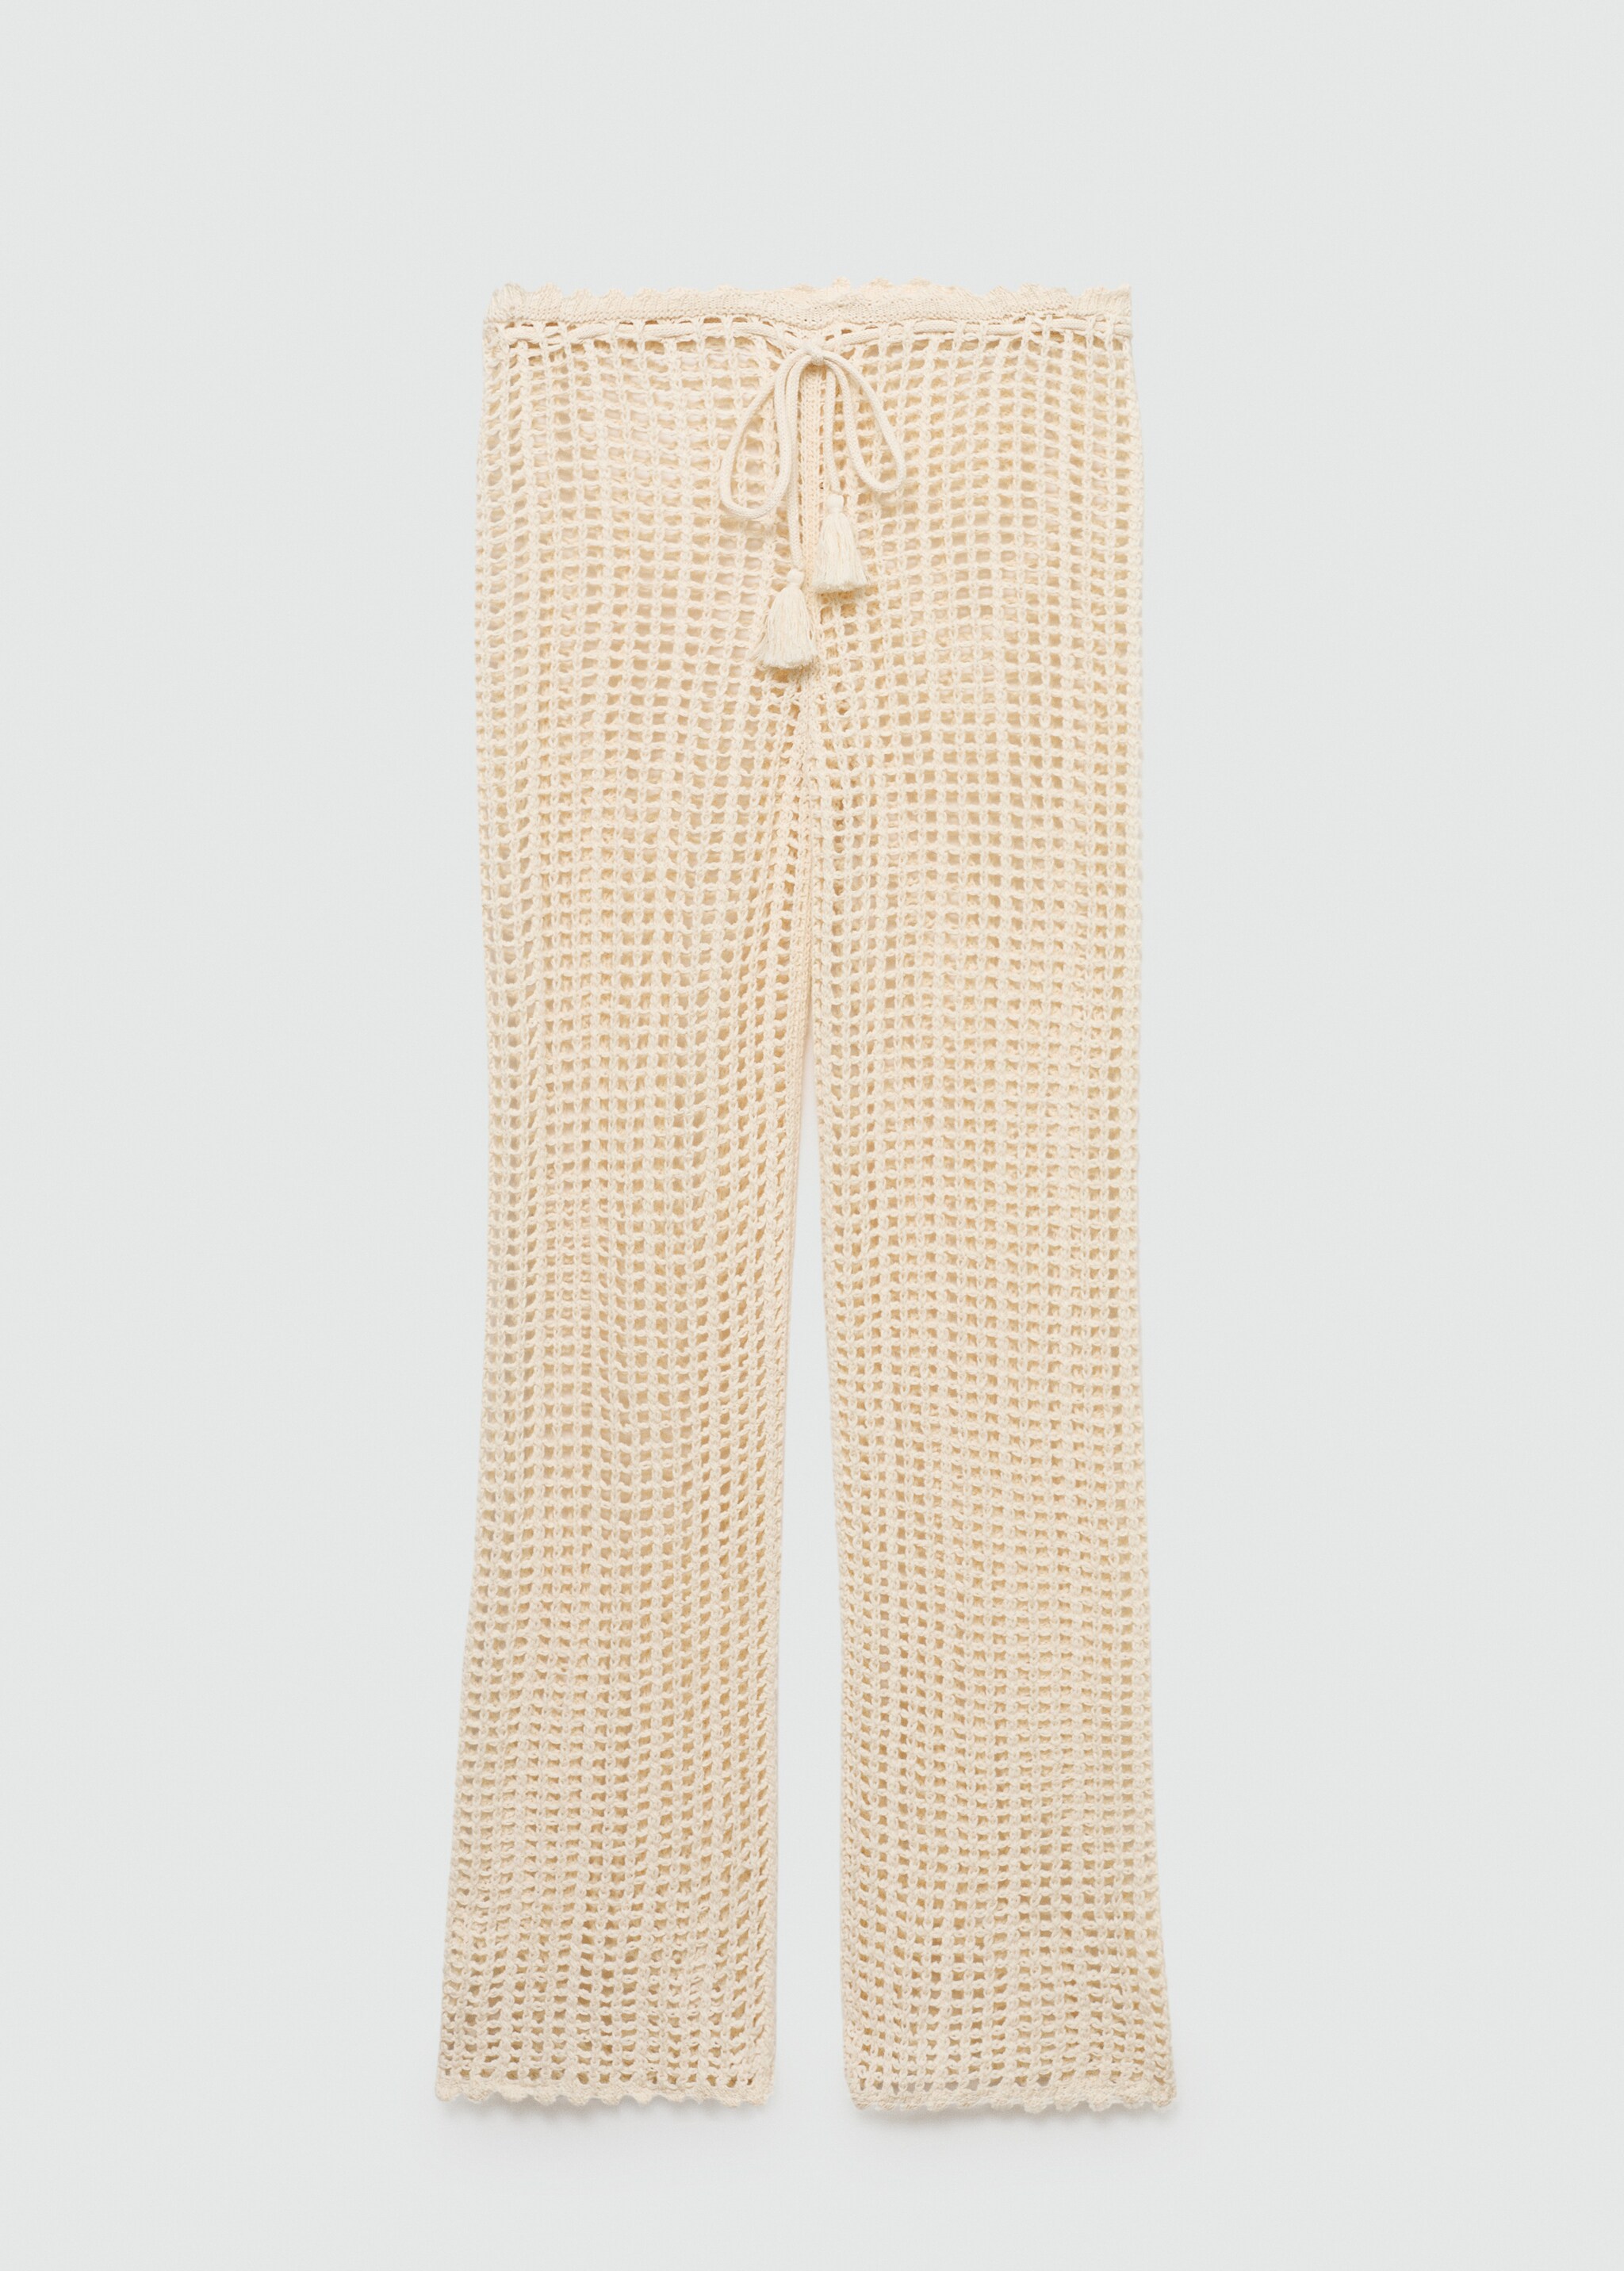 Openwork knitted pants - Article without model